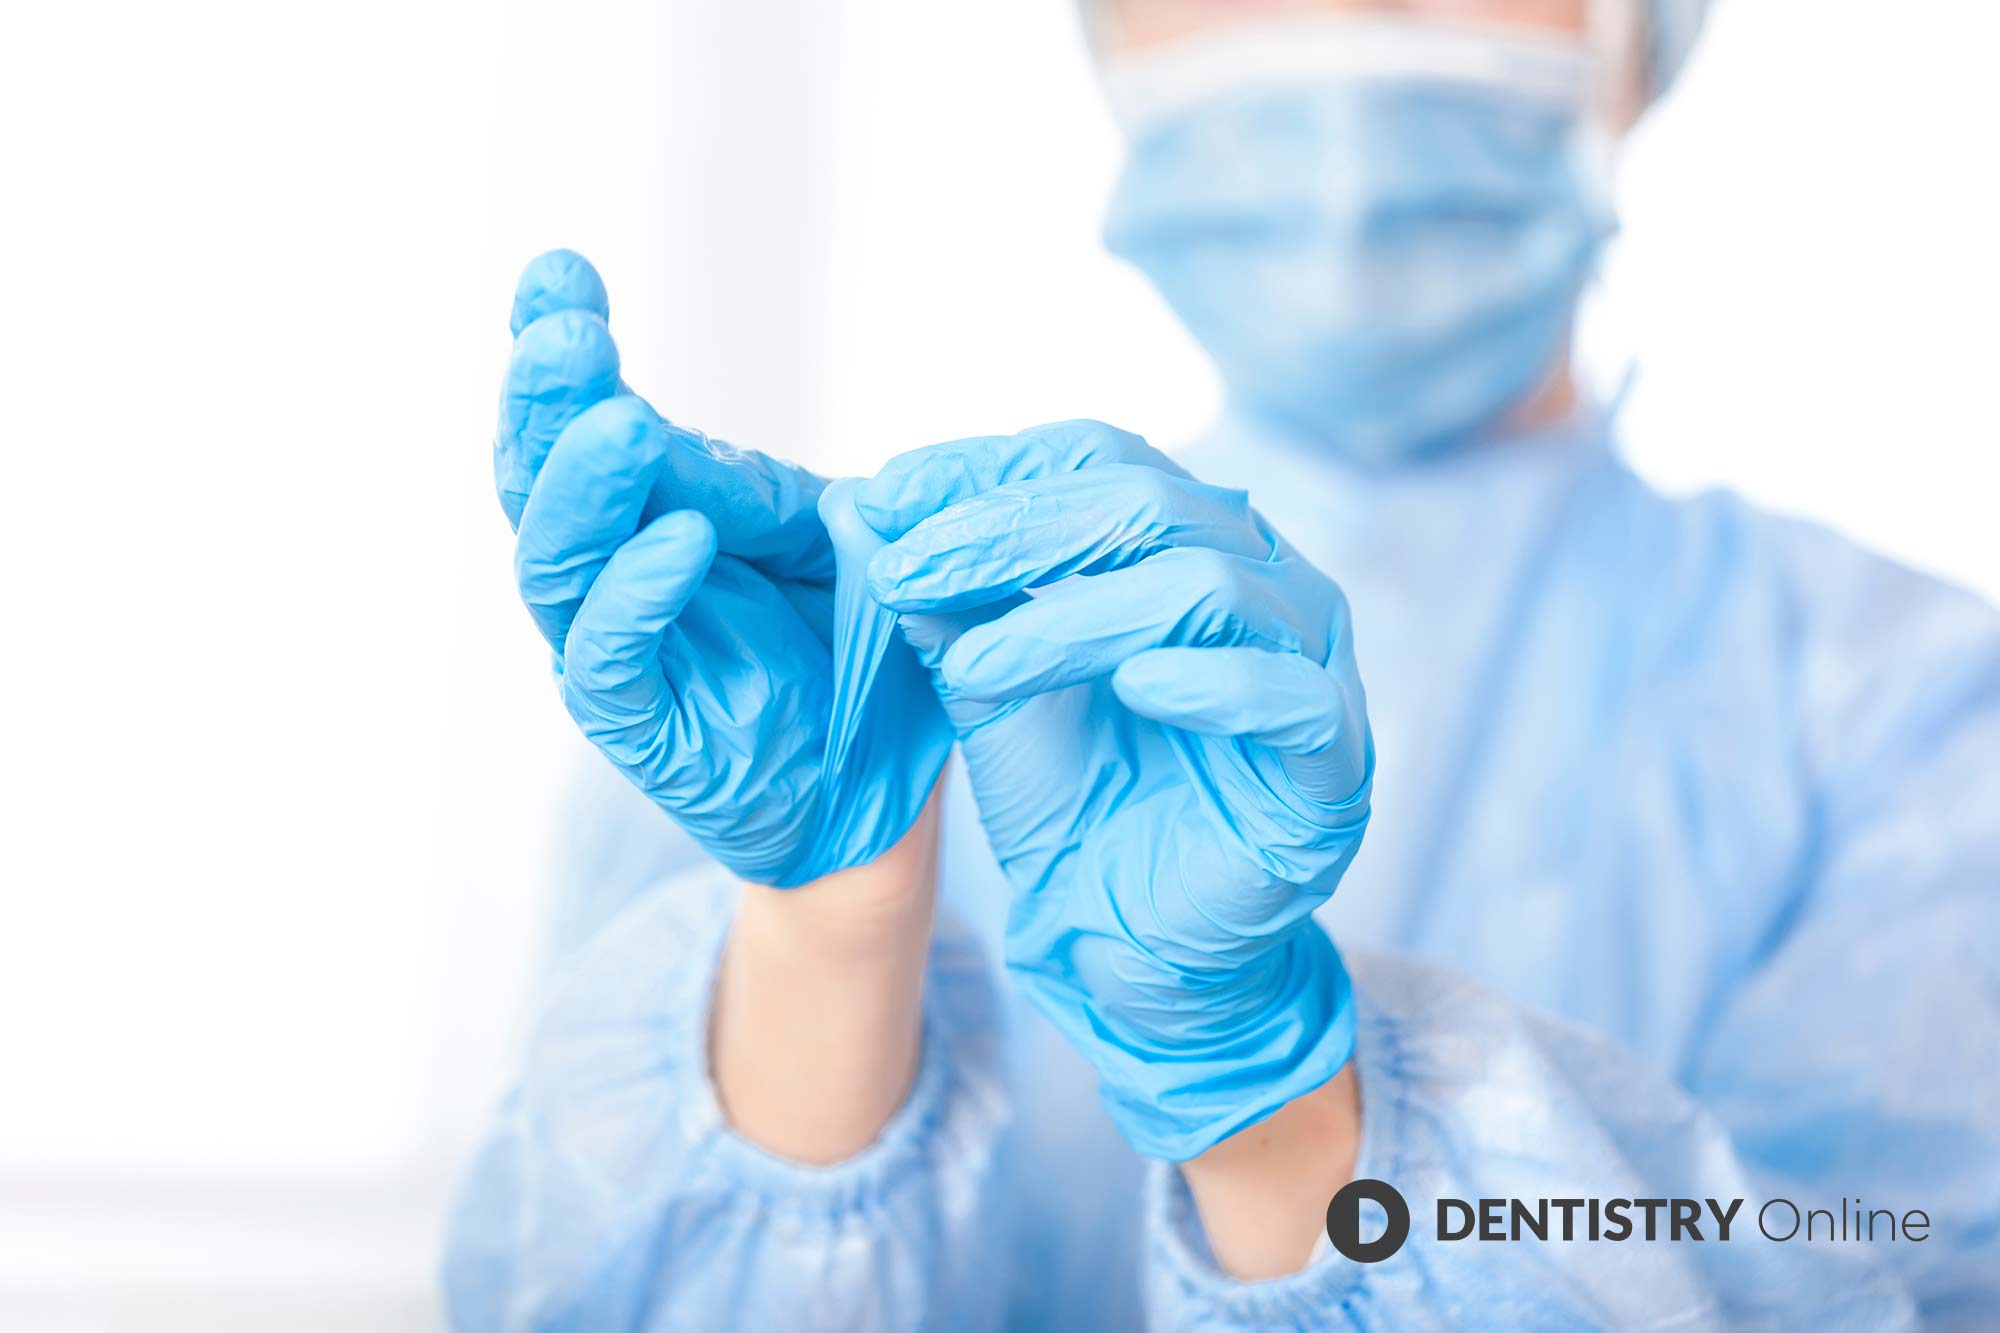 Dentists and their teams are included within the definition of an essential worker, it has been confirmed.